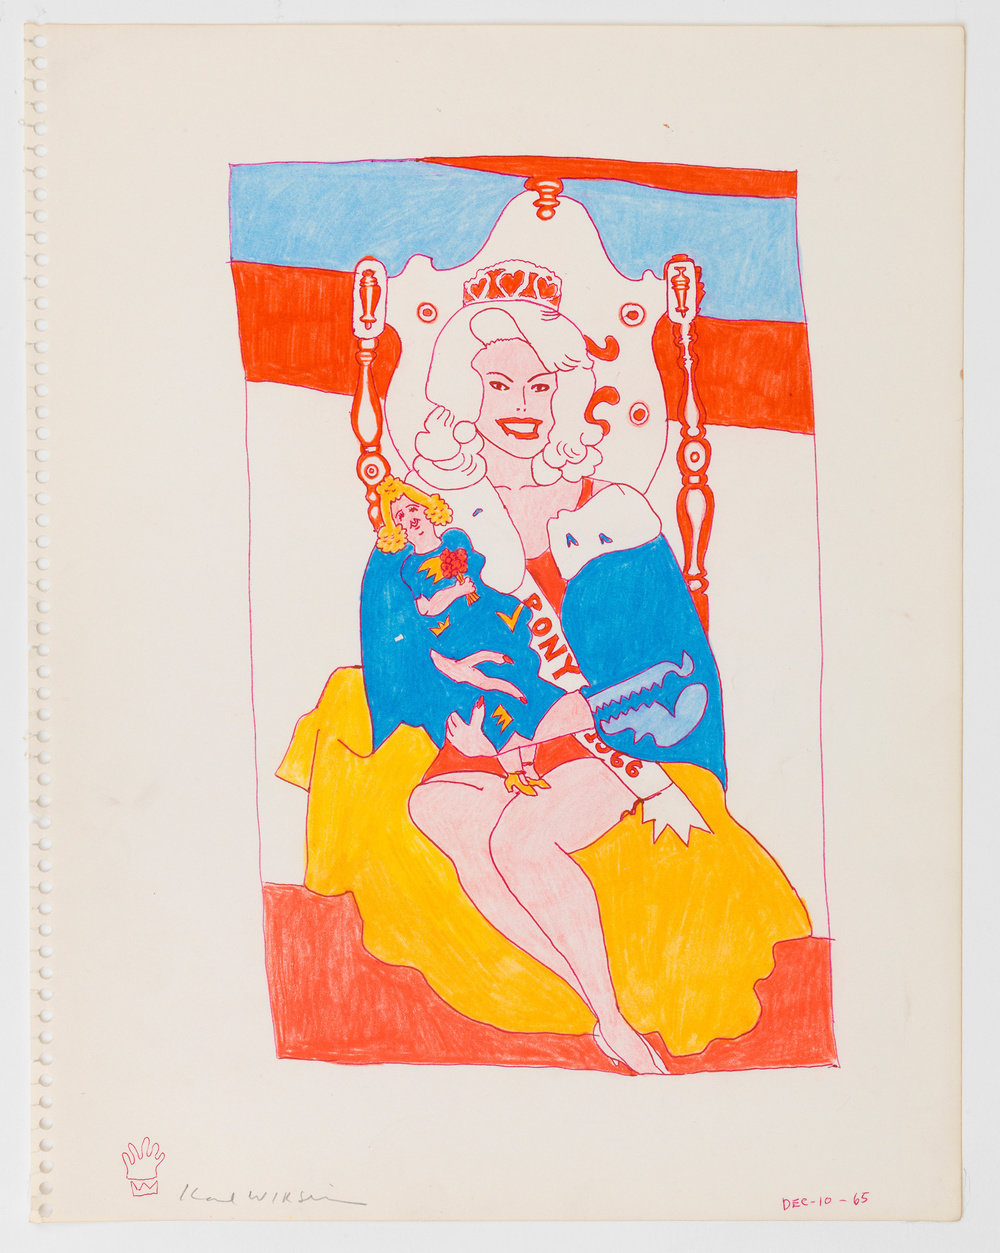 A color ink on paper drawing by Karl Wirsum of a smiling, female figure, seated on a throne wearing a sash and crown and holding a doll. 